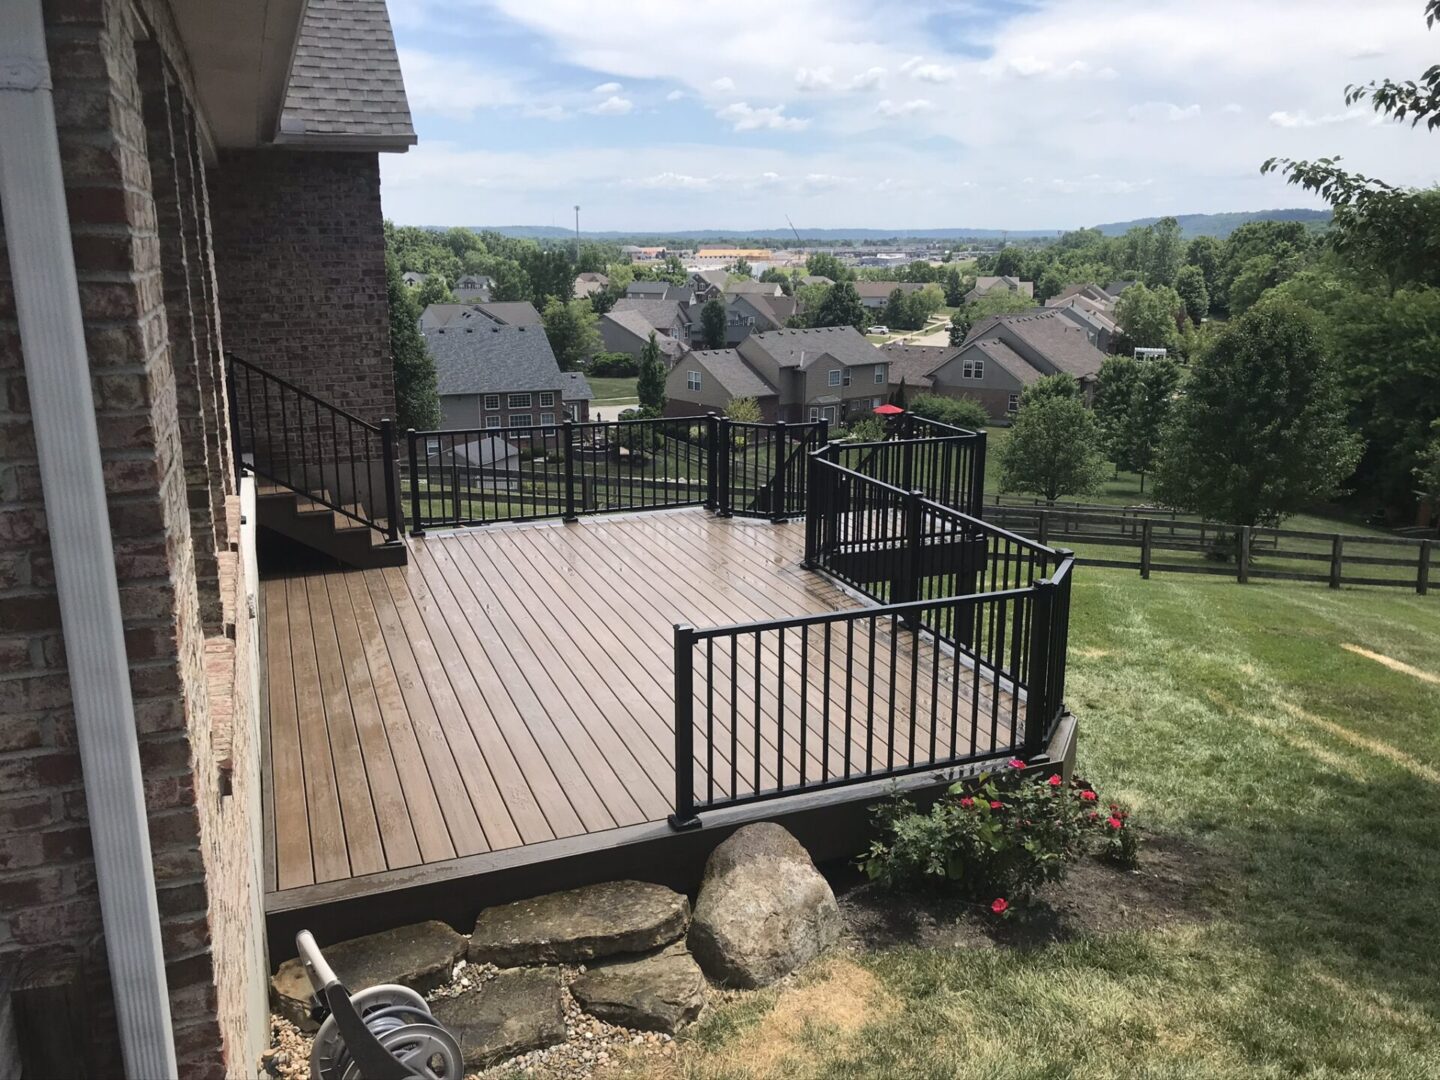 A large deck with stairs and railing in the middle of a yard.